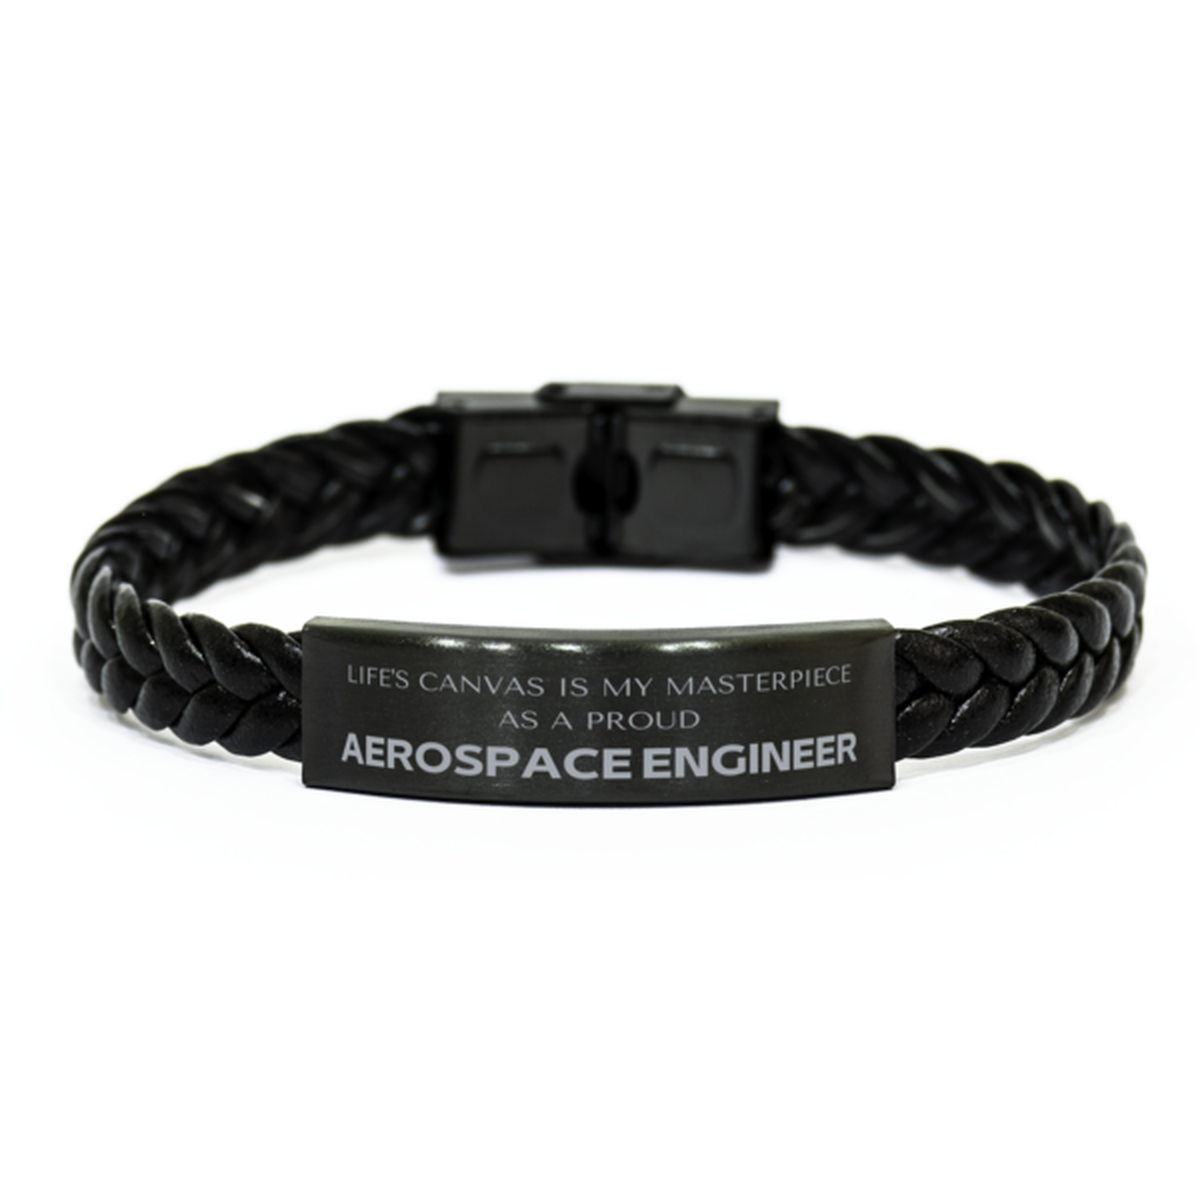 Proud Aerospace Engineer Gifts, Life's canvas is my masterpiece, Epic Birthday Christmas Unique Braided Leather Bracelet For Aerospace Engineer, Coworkers, Men, Women, Friends